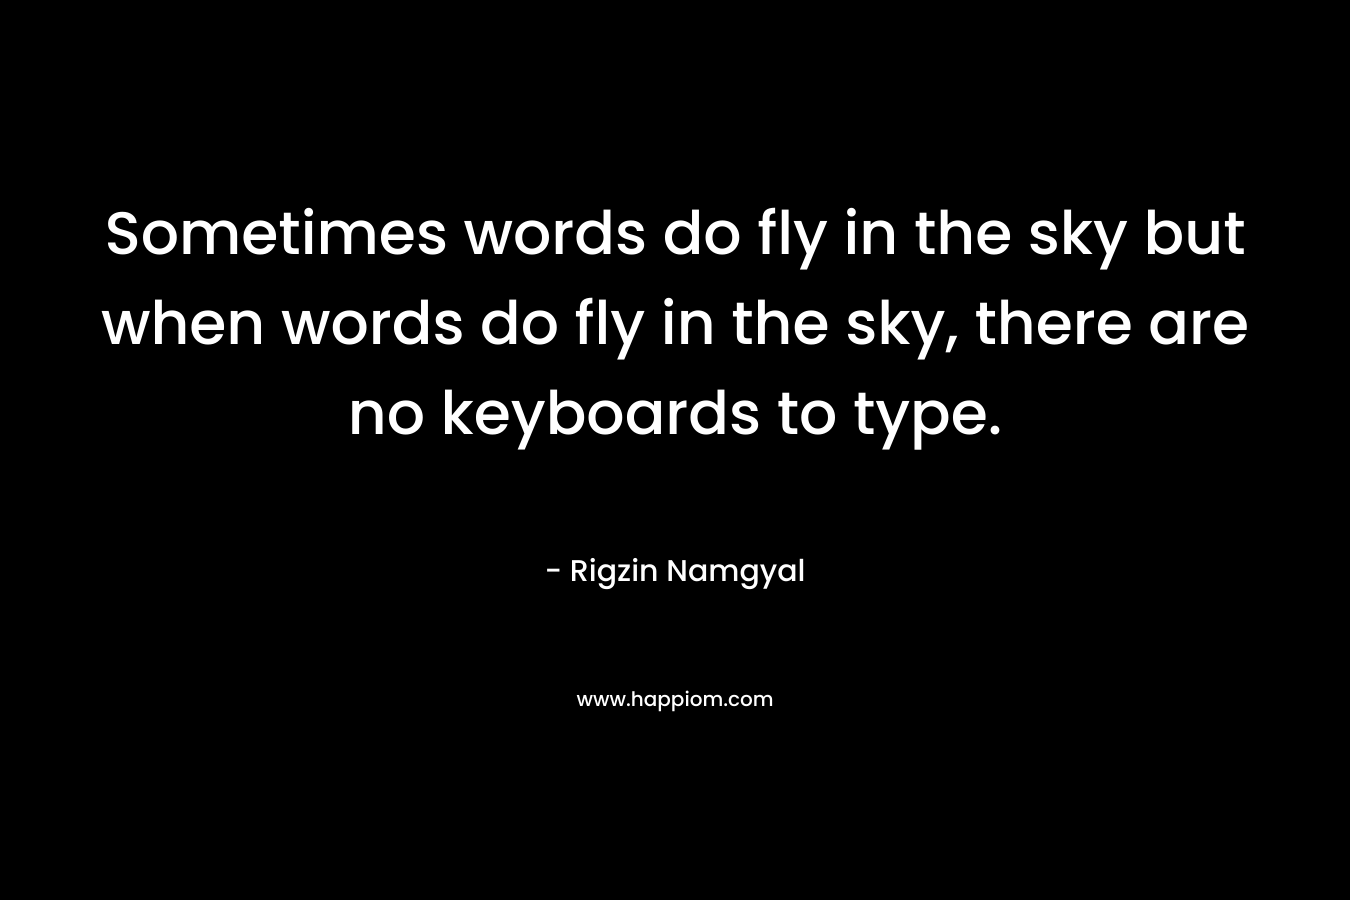 Sometimes words do fly in the sky but when words do fly in the sky, there are no keyboards to type.